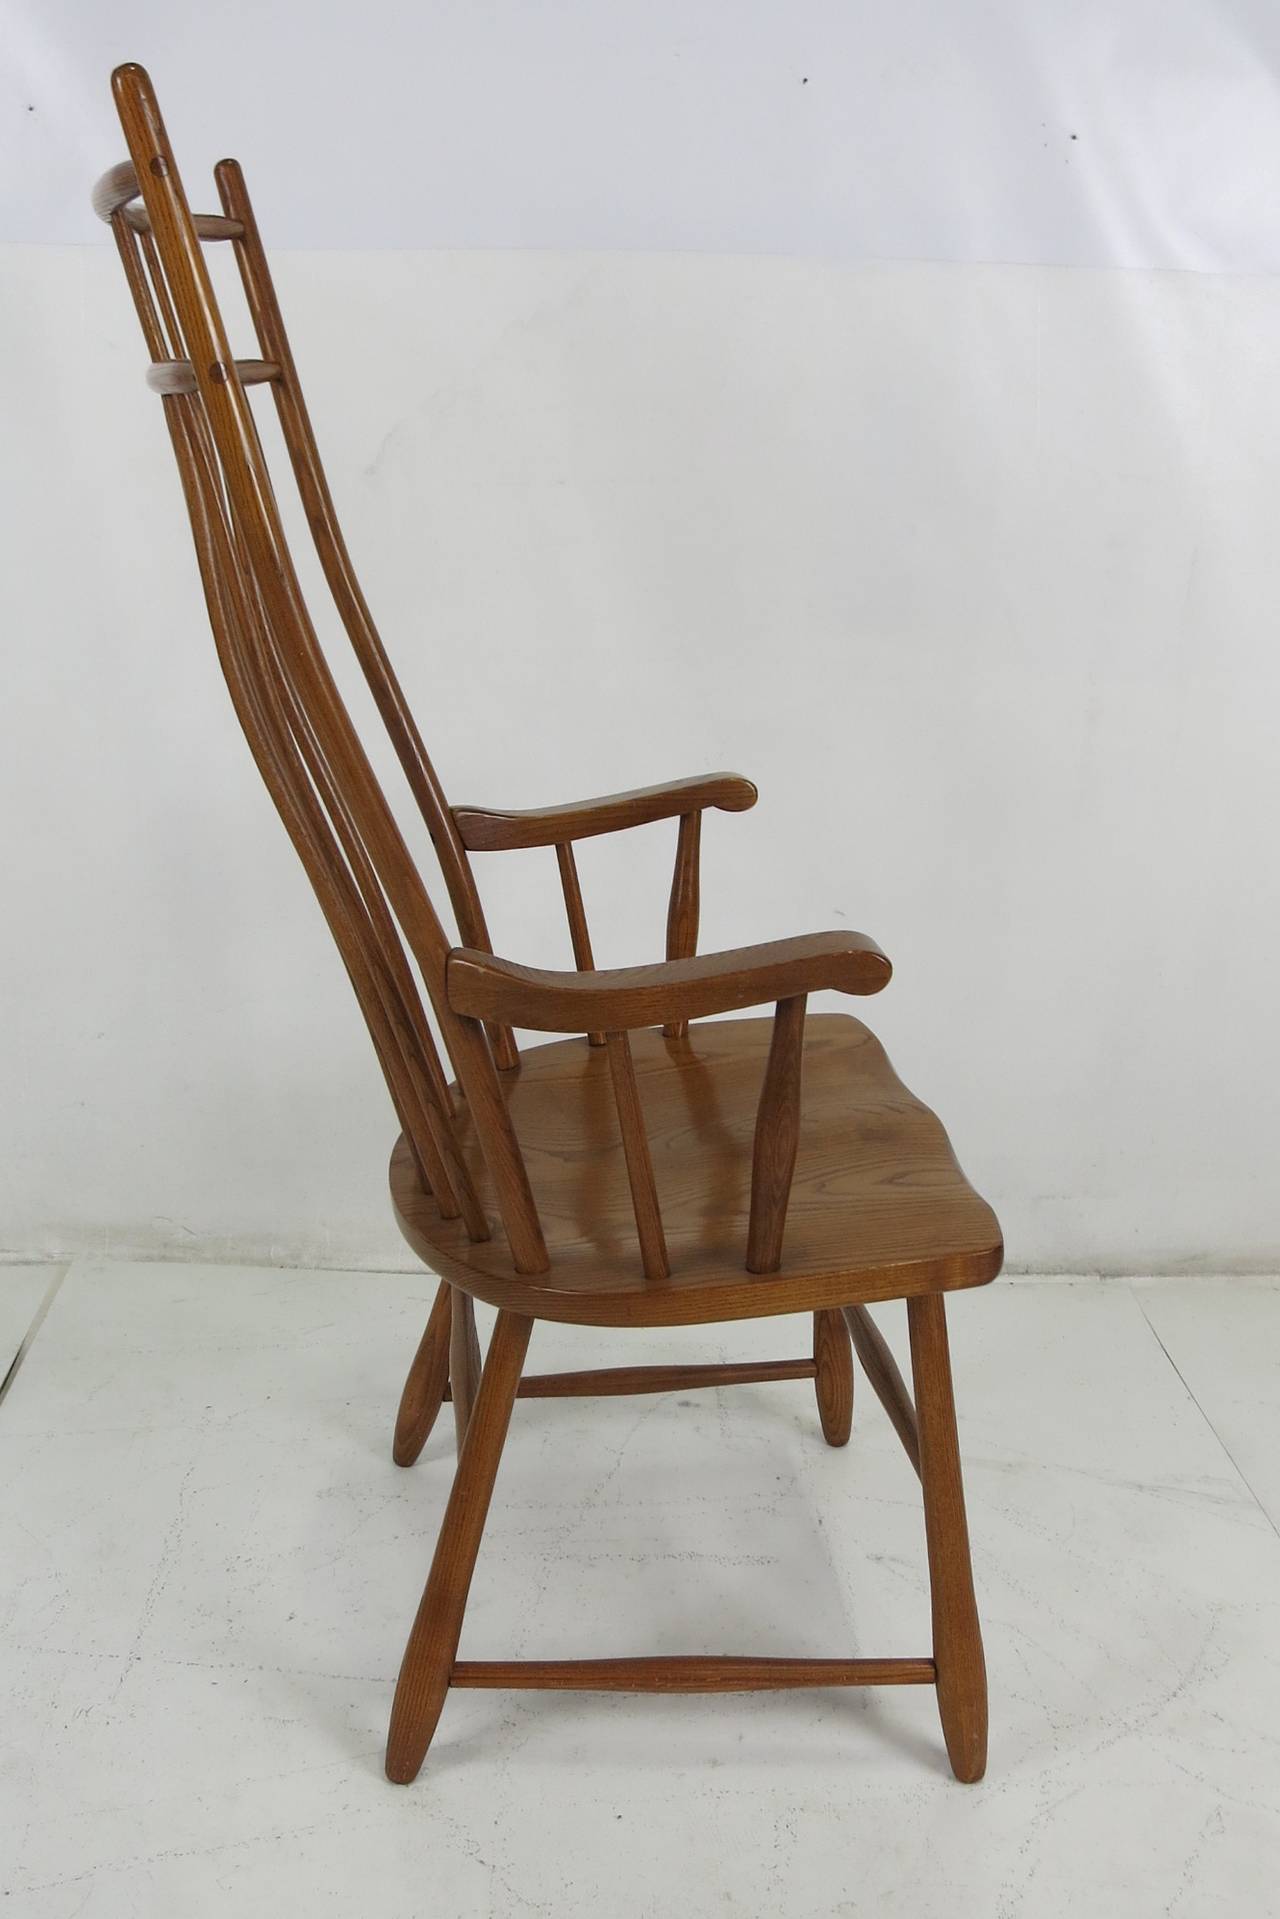 Set of six beautifully crafted Spindle Back Dining Chairs

Dimensions-

Arms- 25 x 23w x 43.5, 17.5
Sides- 19.75 x 22 x 41.5, 17.5